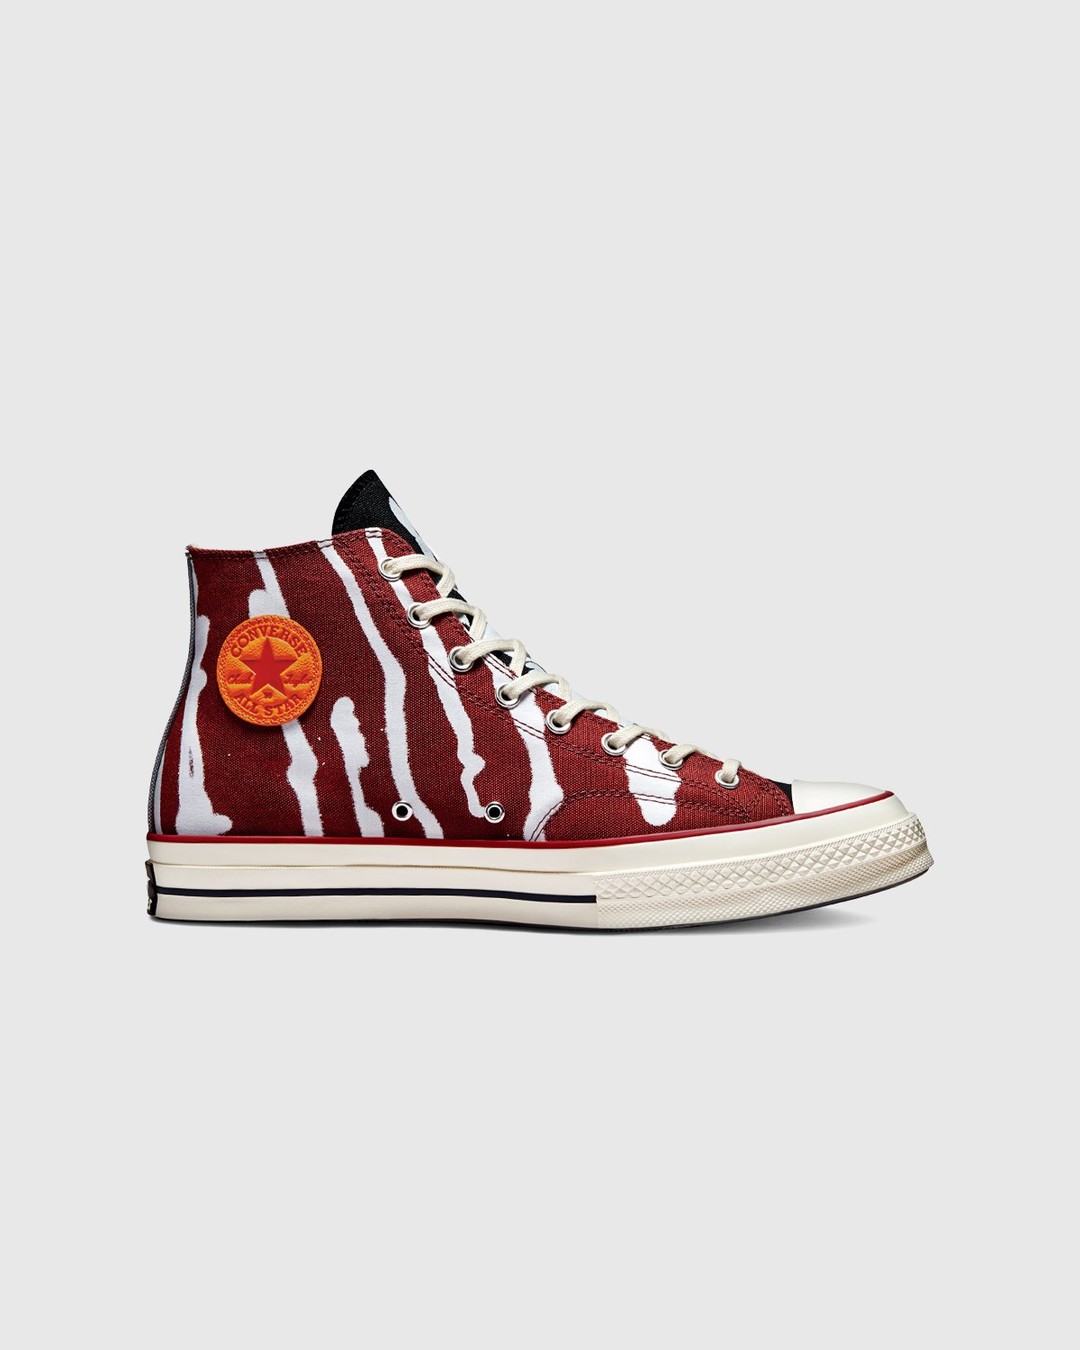 Converse x Come Tees – Chuck 70 Hi White/Multi/Egret - Sneakers - Red - Image 1